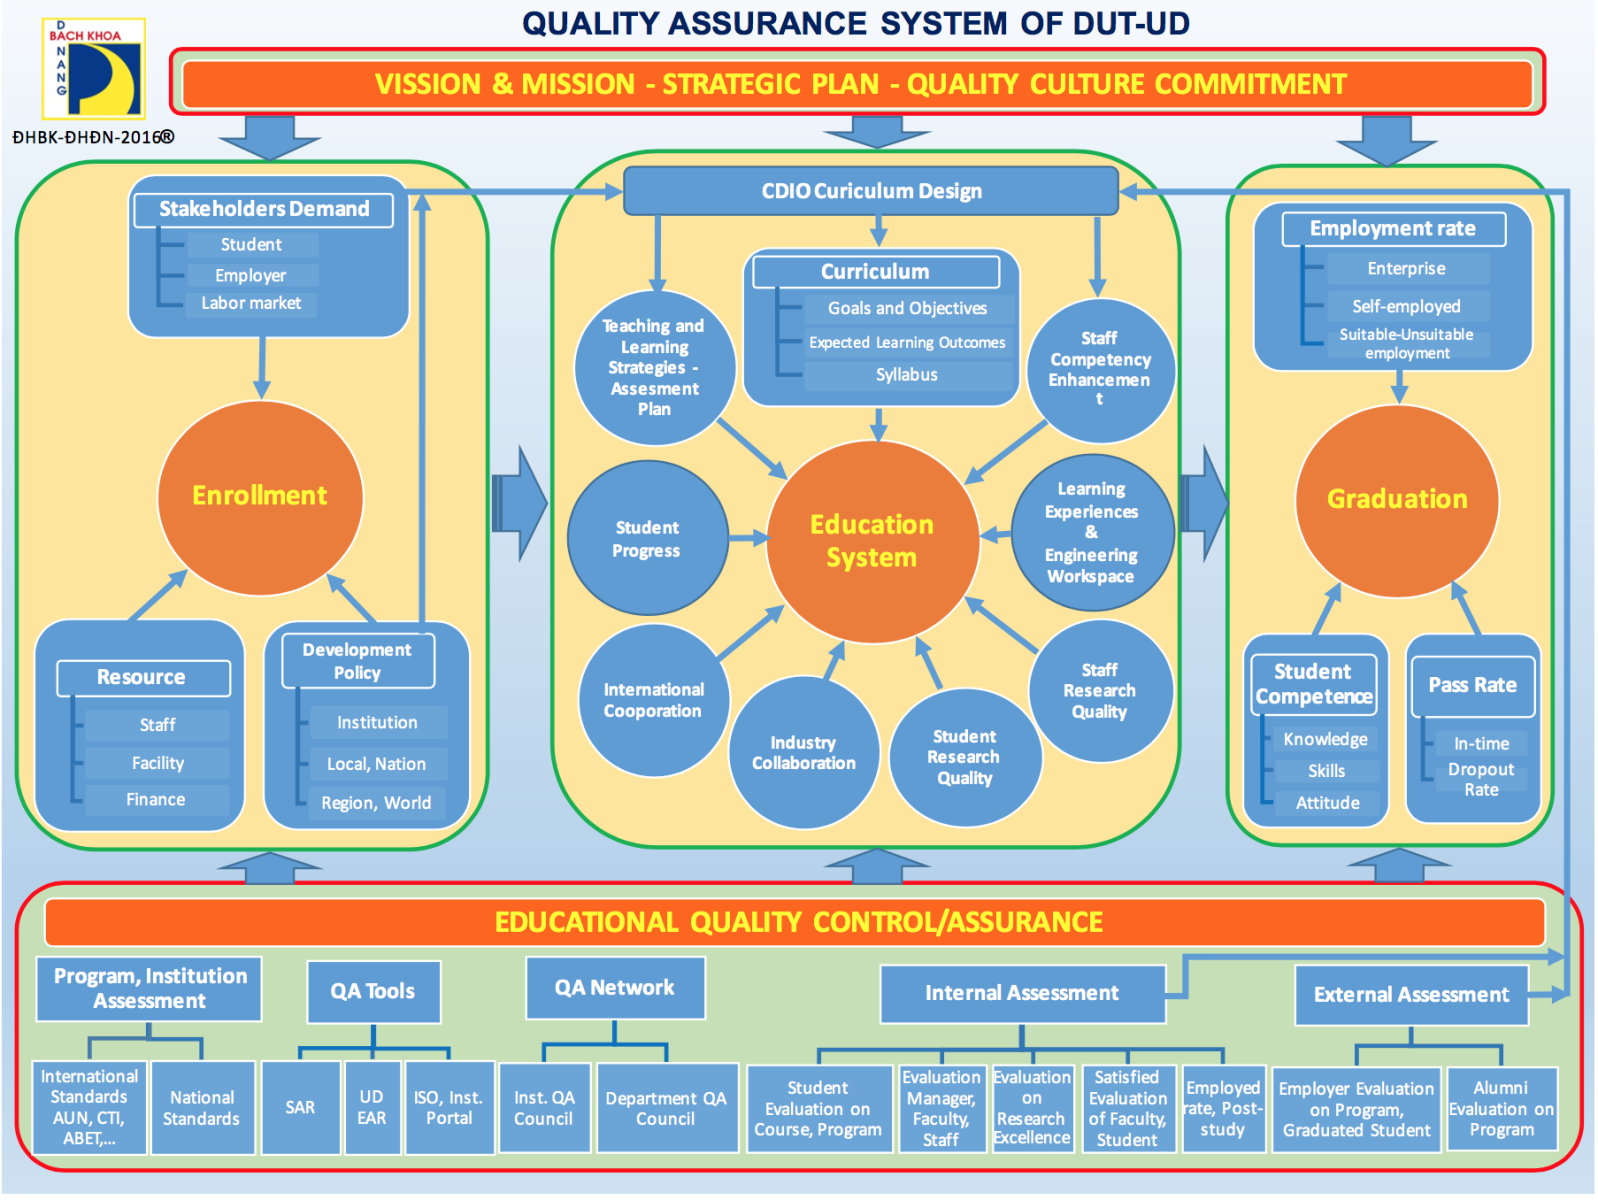 Quality Assurance System of DUT